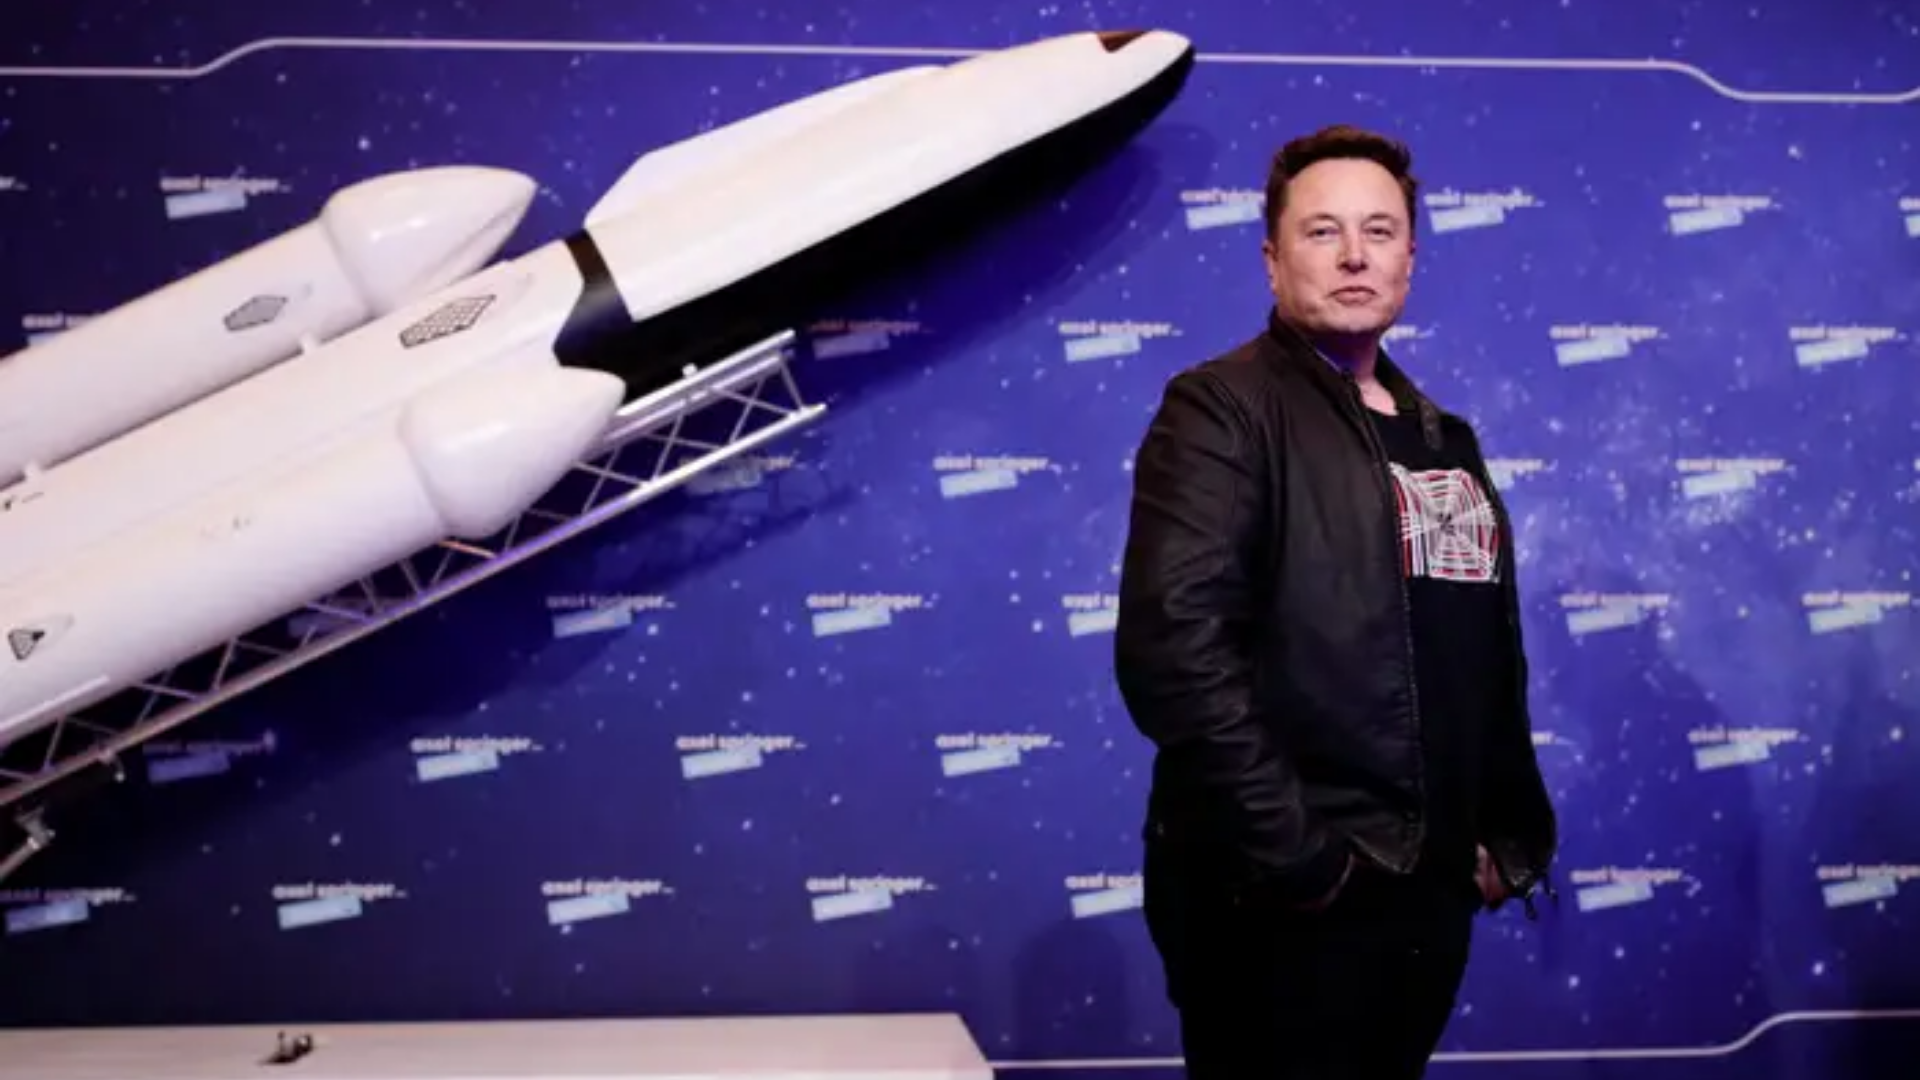 After 154 Tweets, a Video Creator finally got the attention of Elon Musk